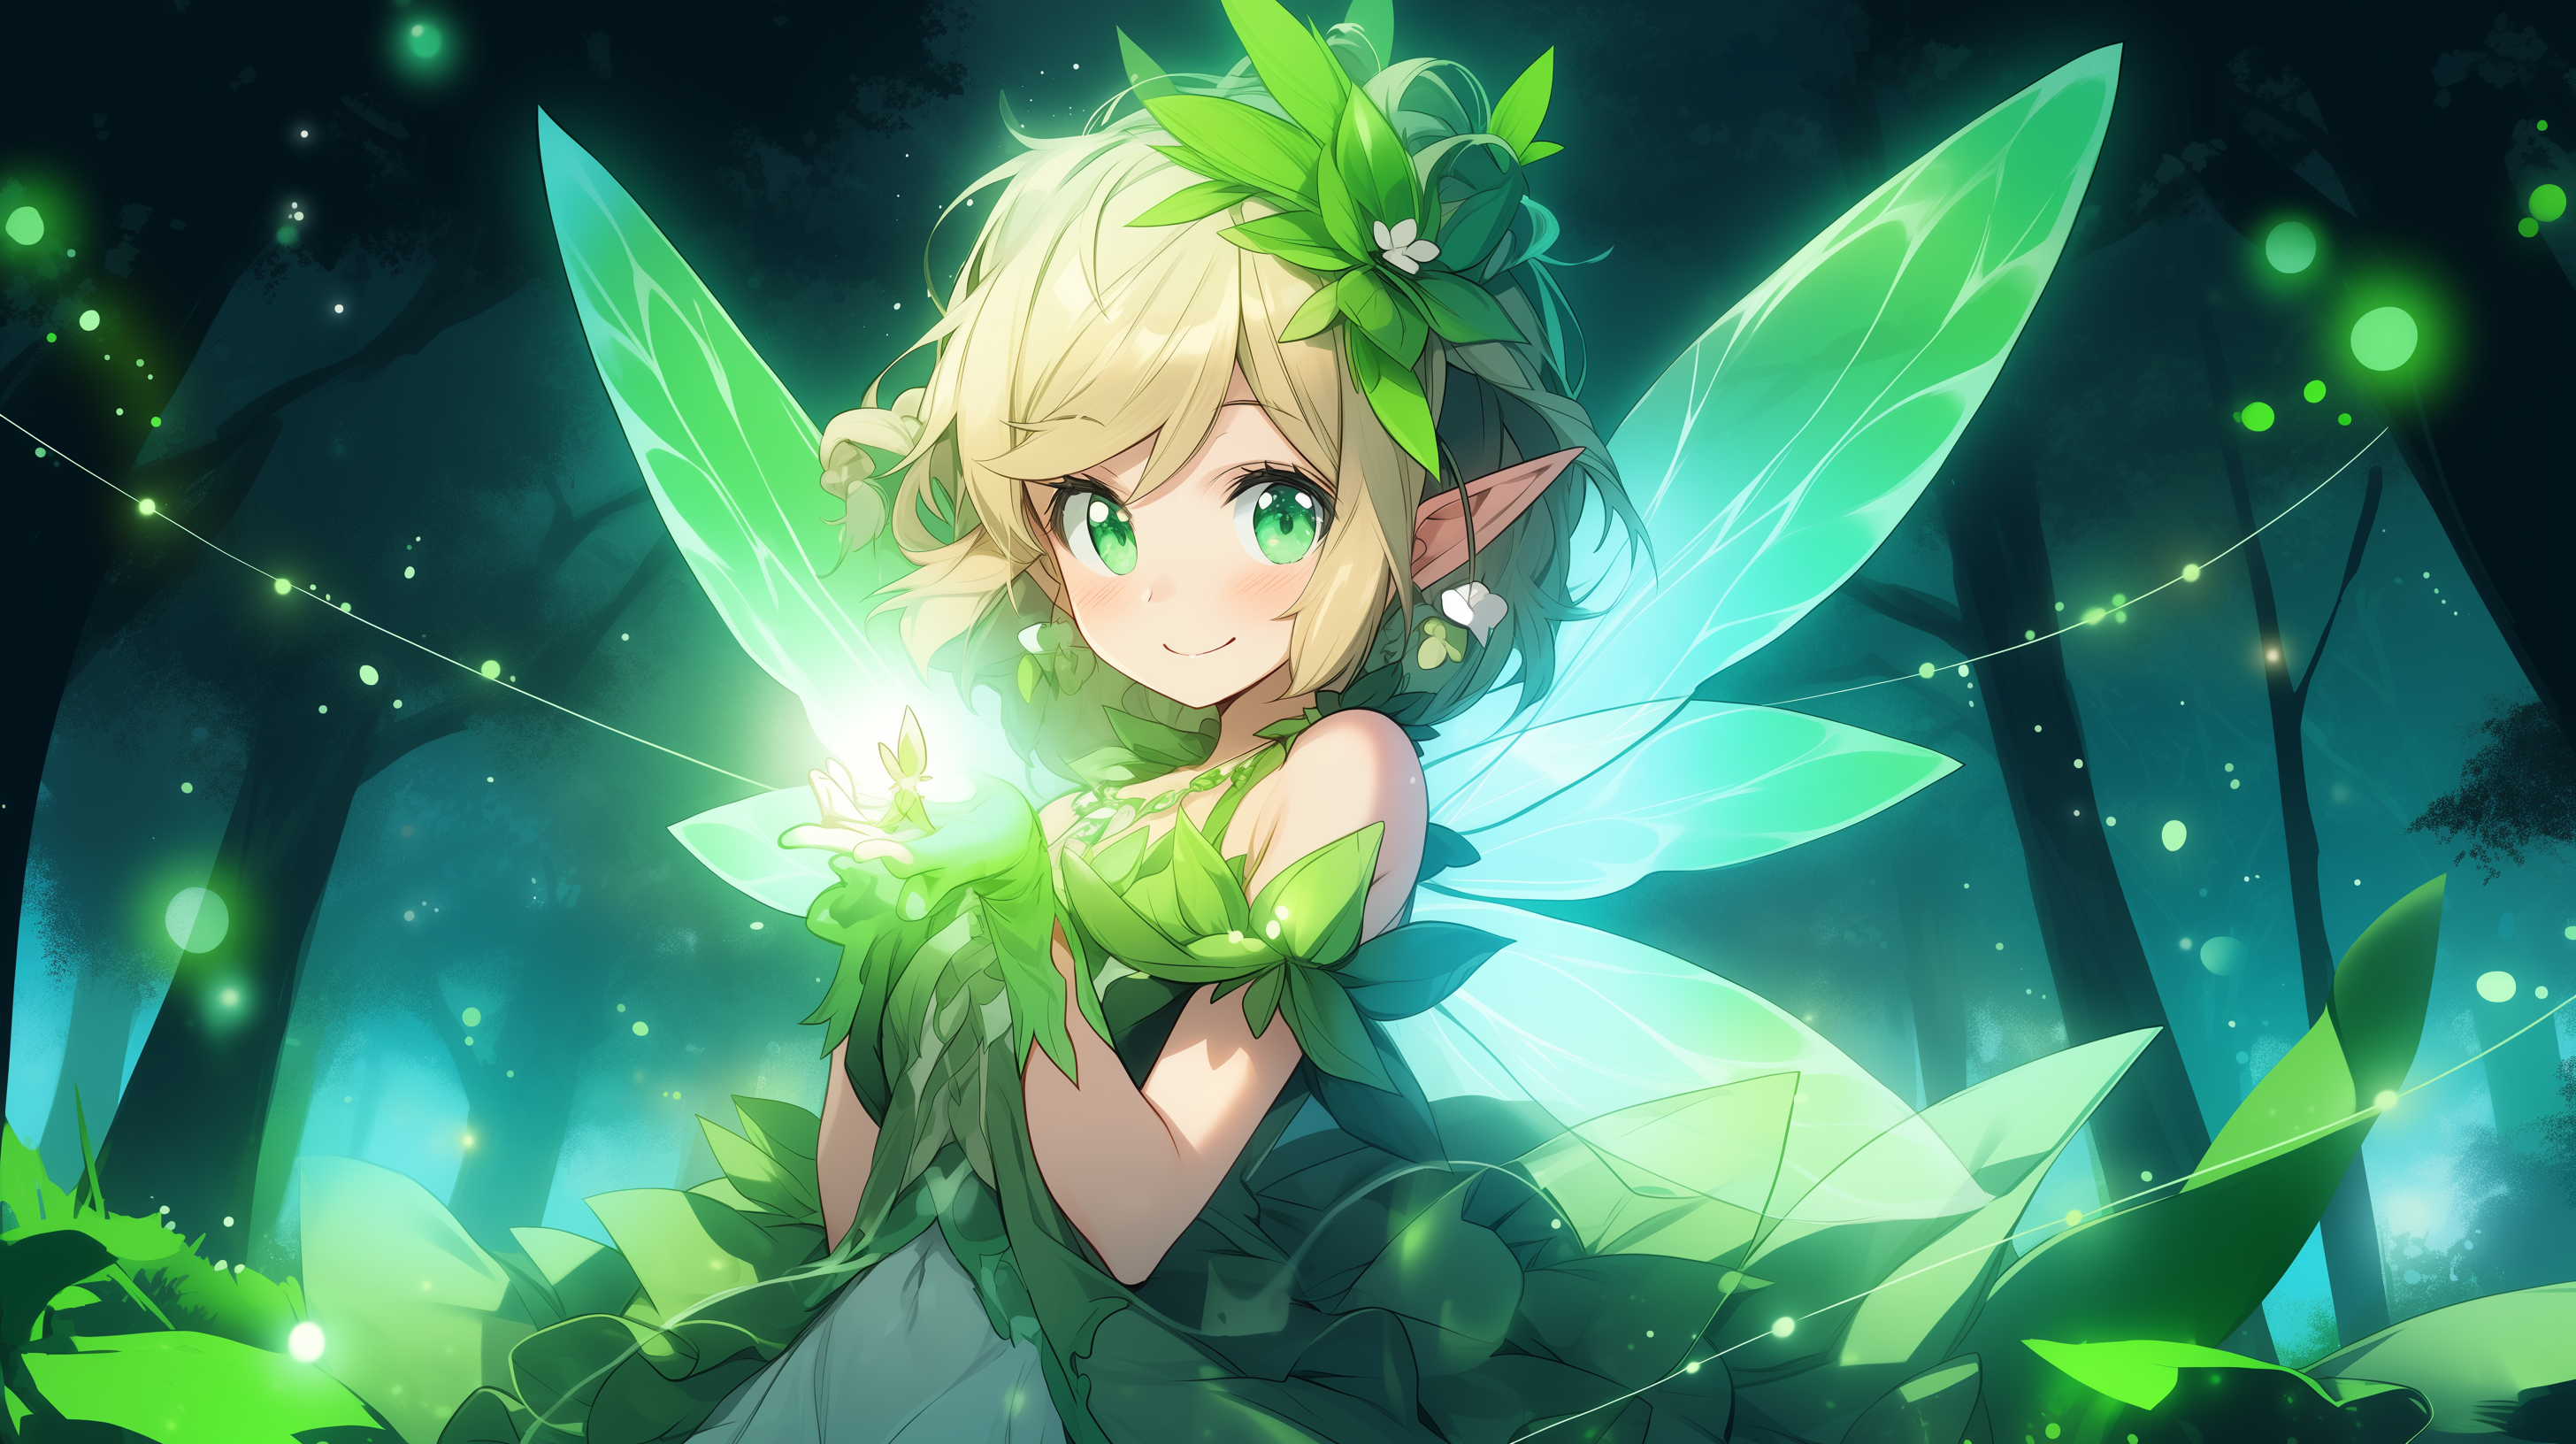 Cute Fairy - Anime Girls Wallpapers and Images - Desktop Nexus Groups-demhanvico.com.vn